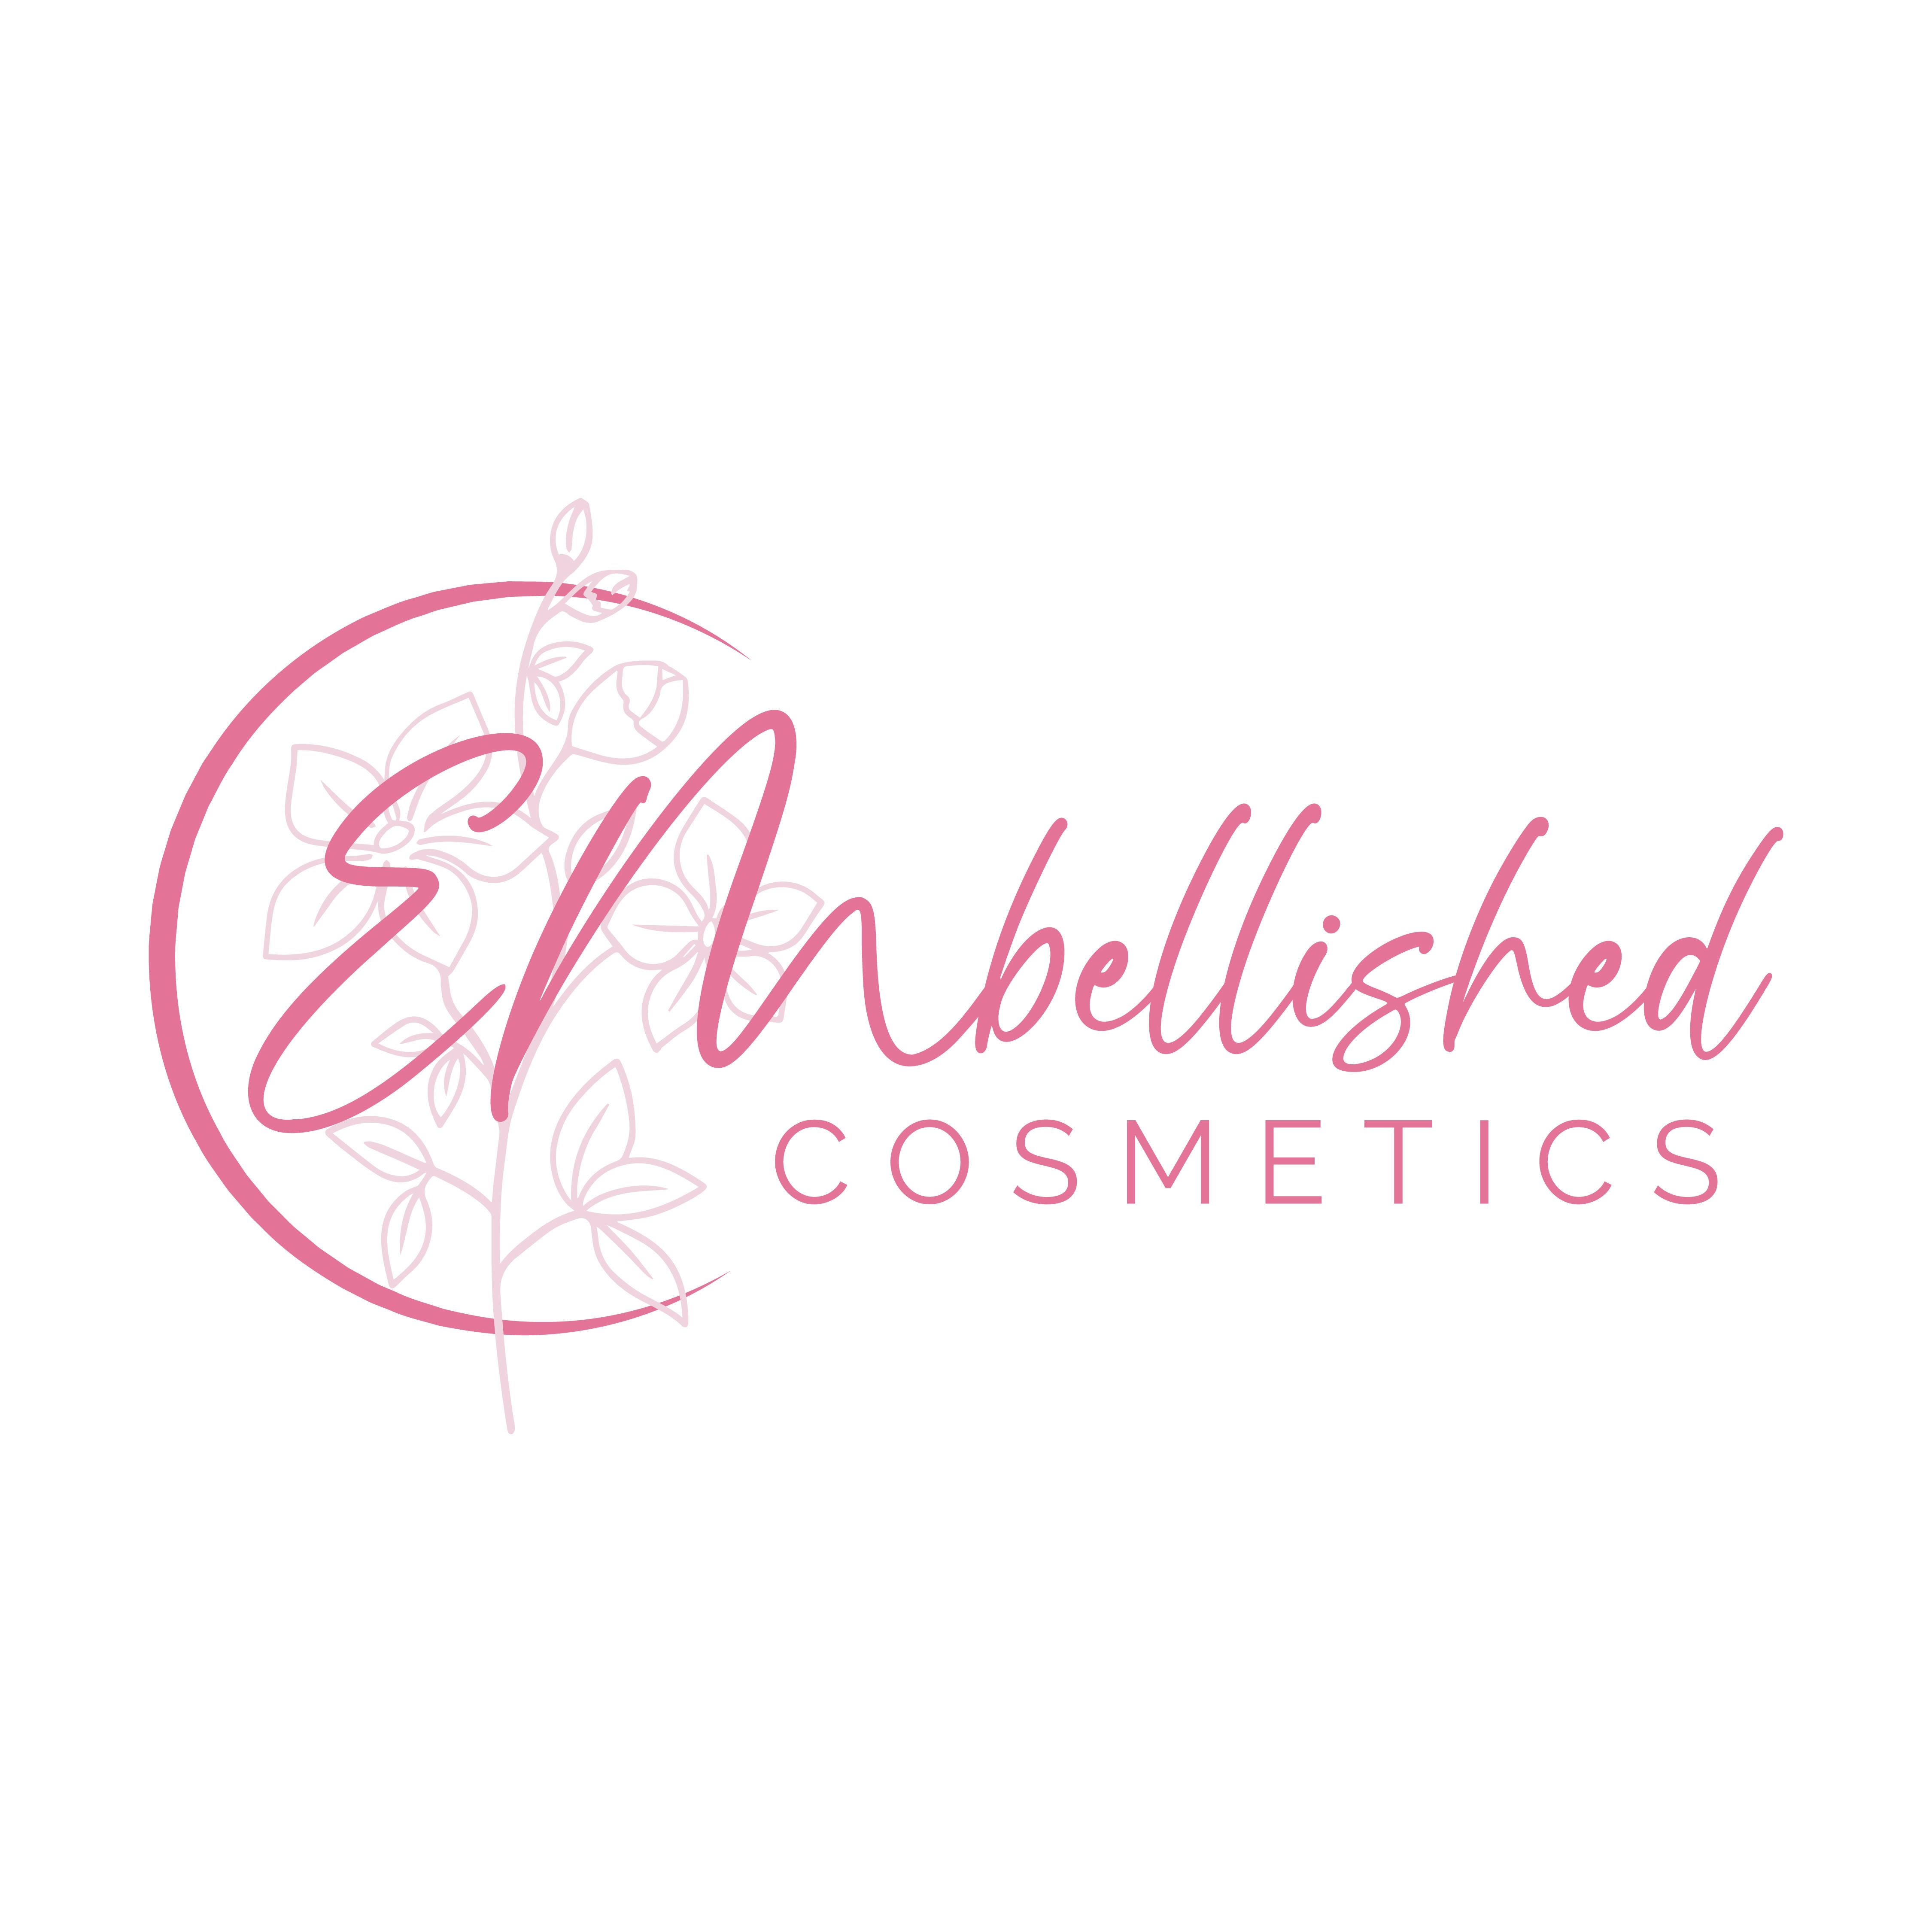 EMbellished Cosmetics by Emily Bishop